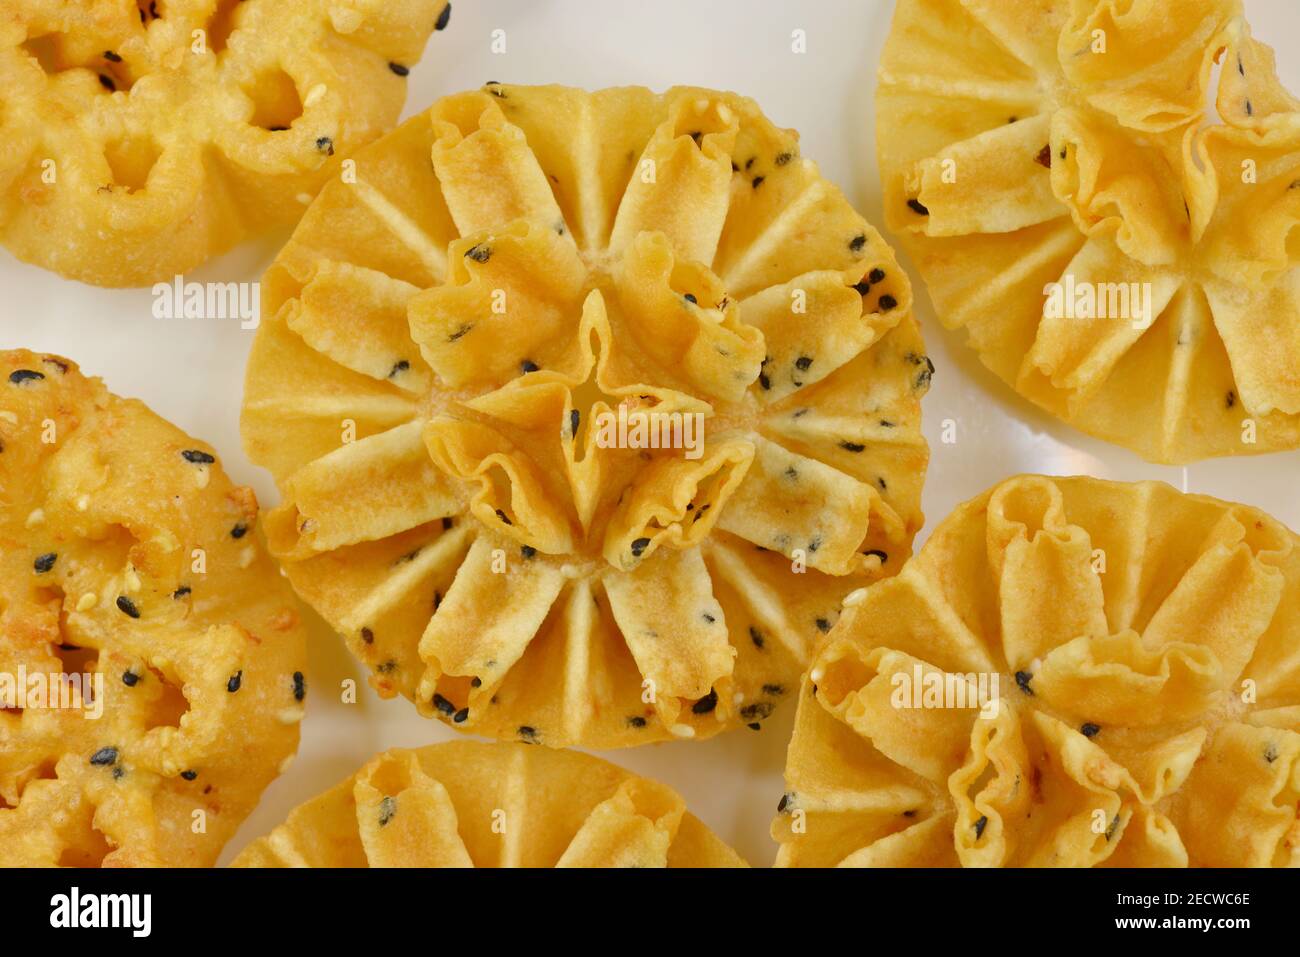 Top view of a Kuih Rose or rosette cookie, a popular festive treat to celebrate Chinese New Year in Singapore and Malaysia Stock Photo